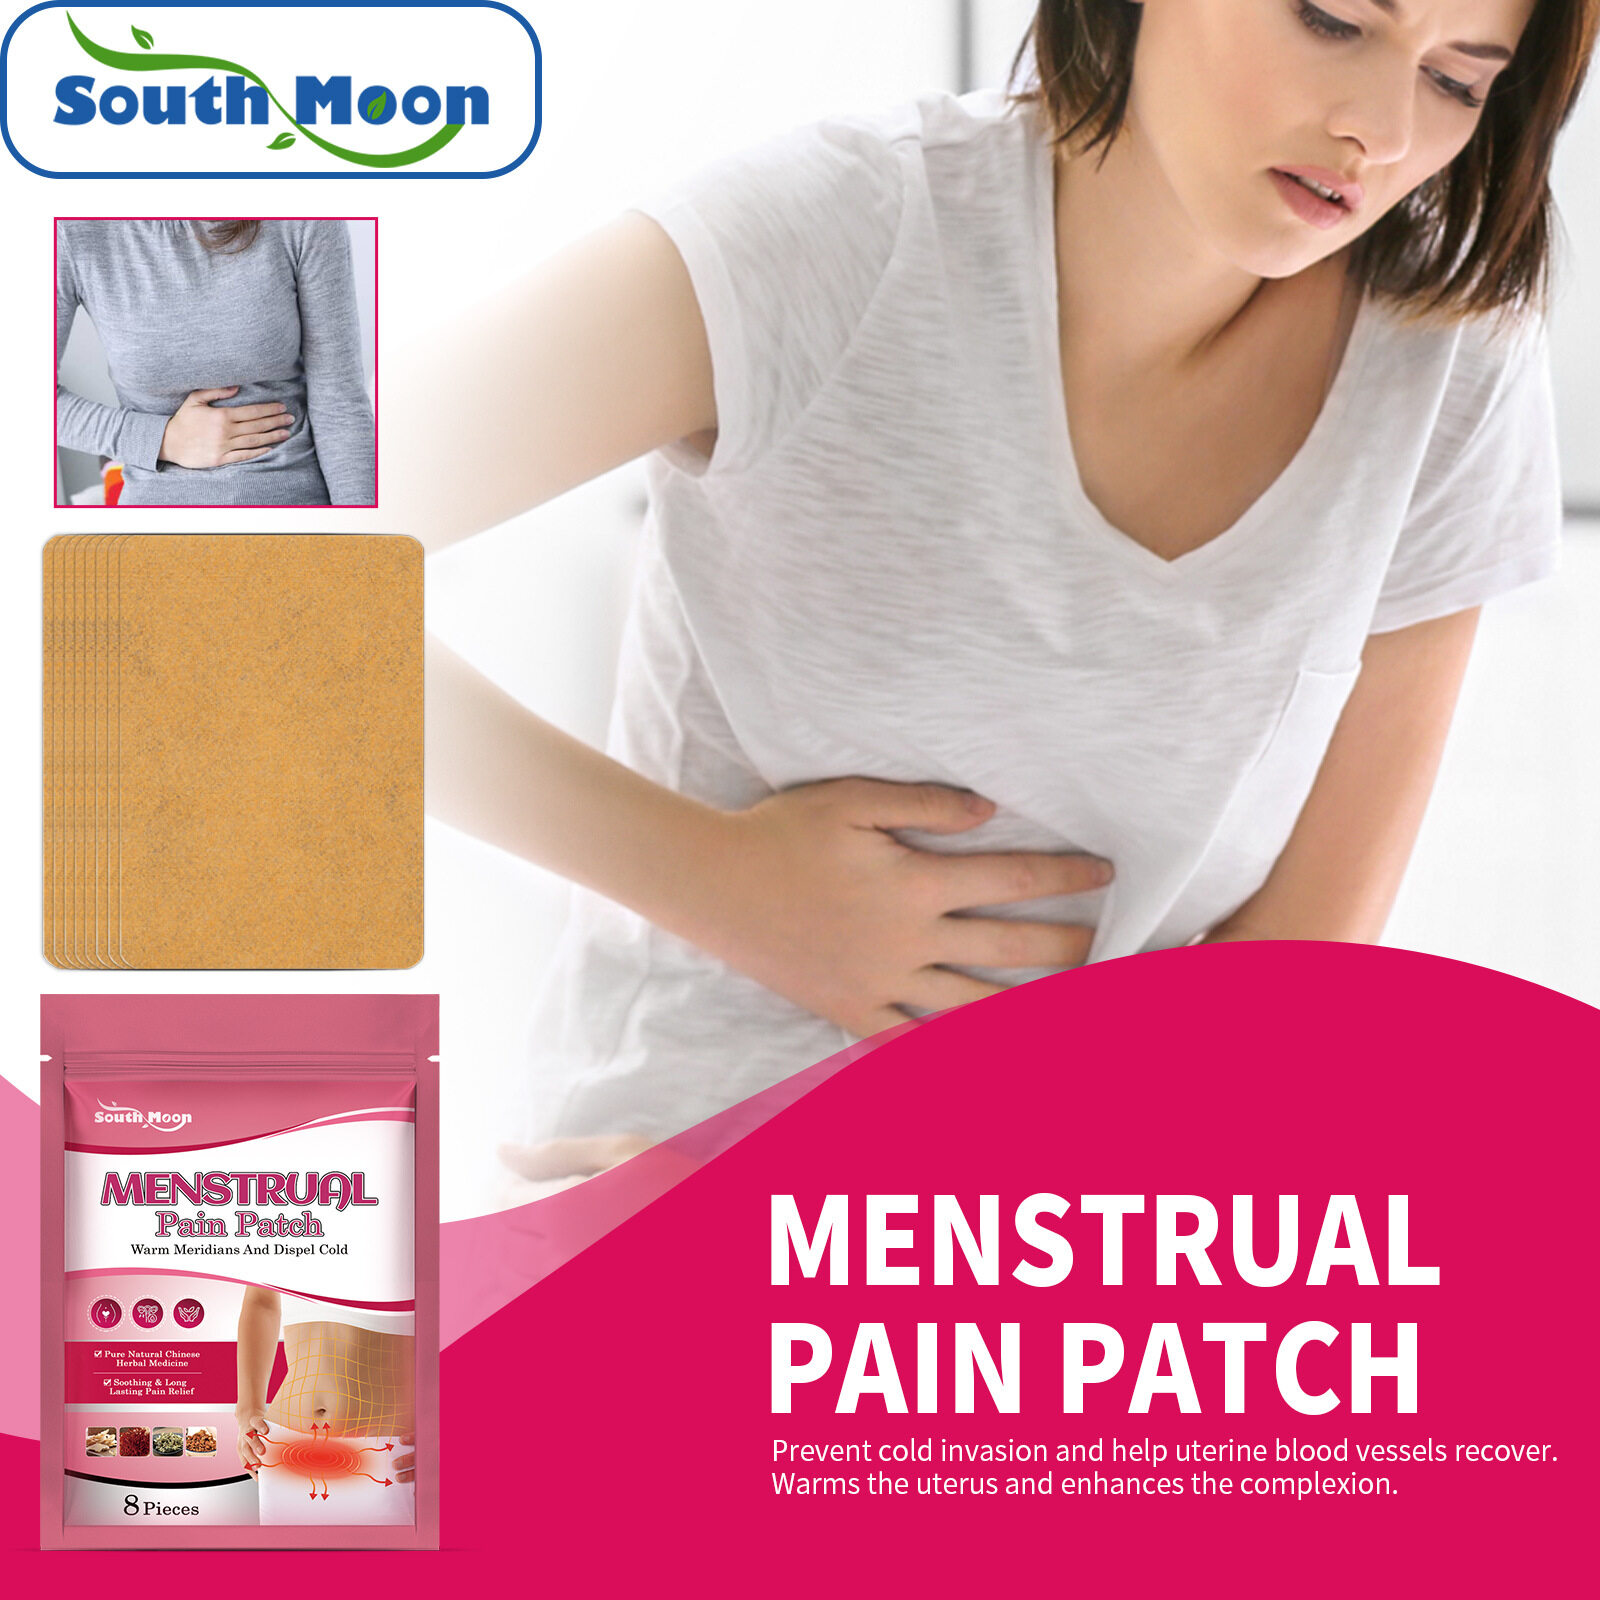 South Moon Menstrual Pain Patch Relieves Menstrual Cramps Pain During